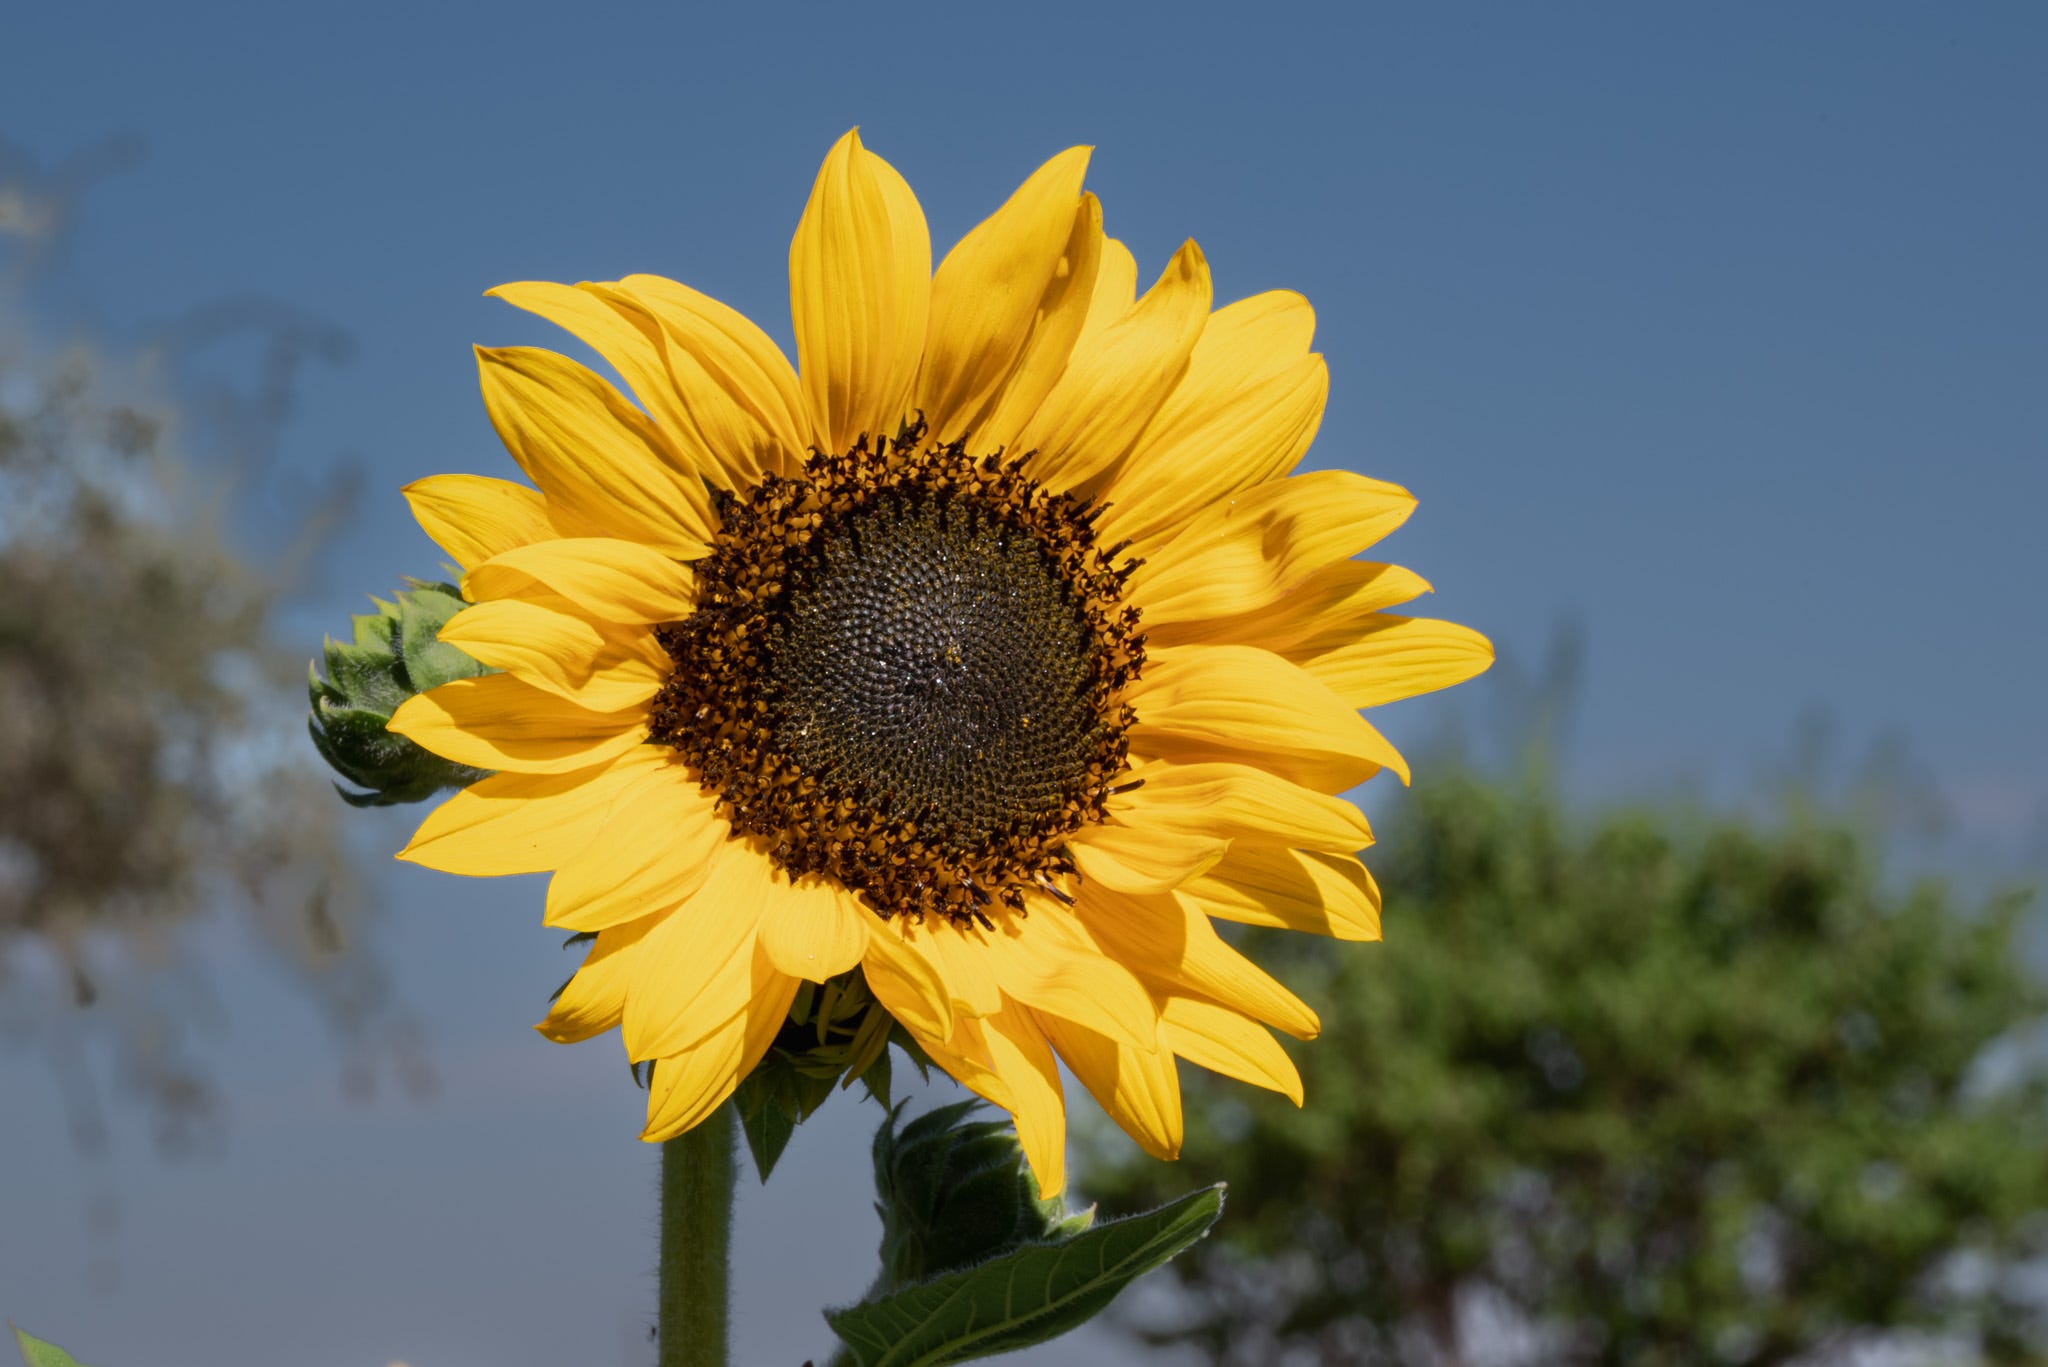 A large yellow sunflower with a brown center against a blue sky